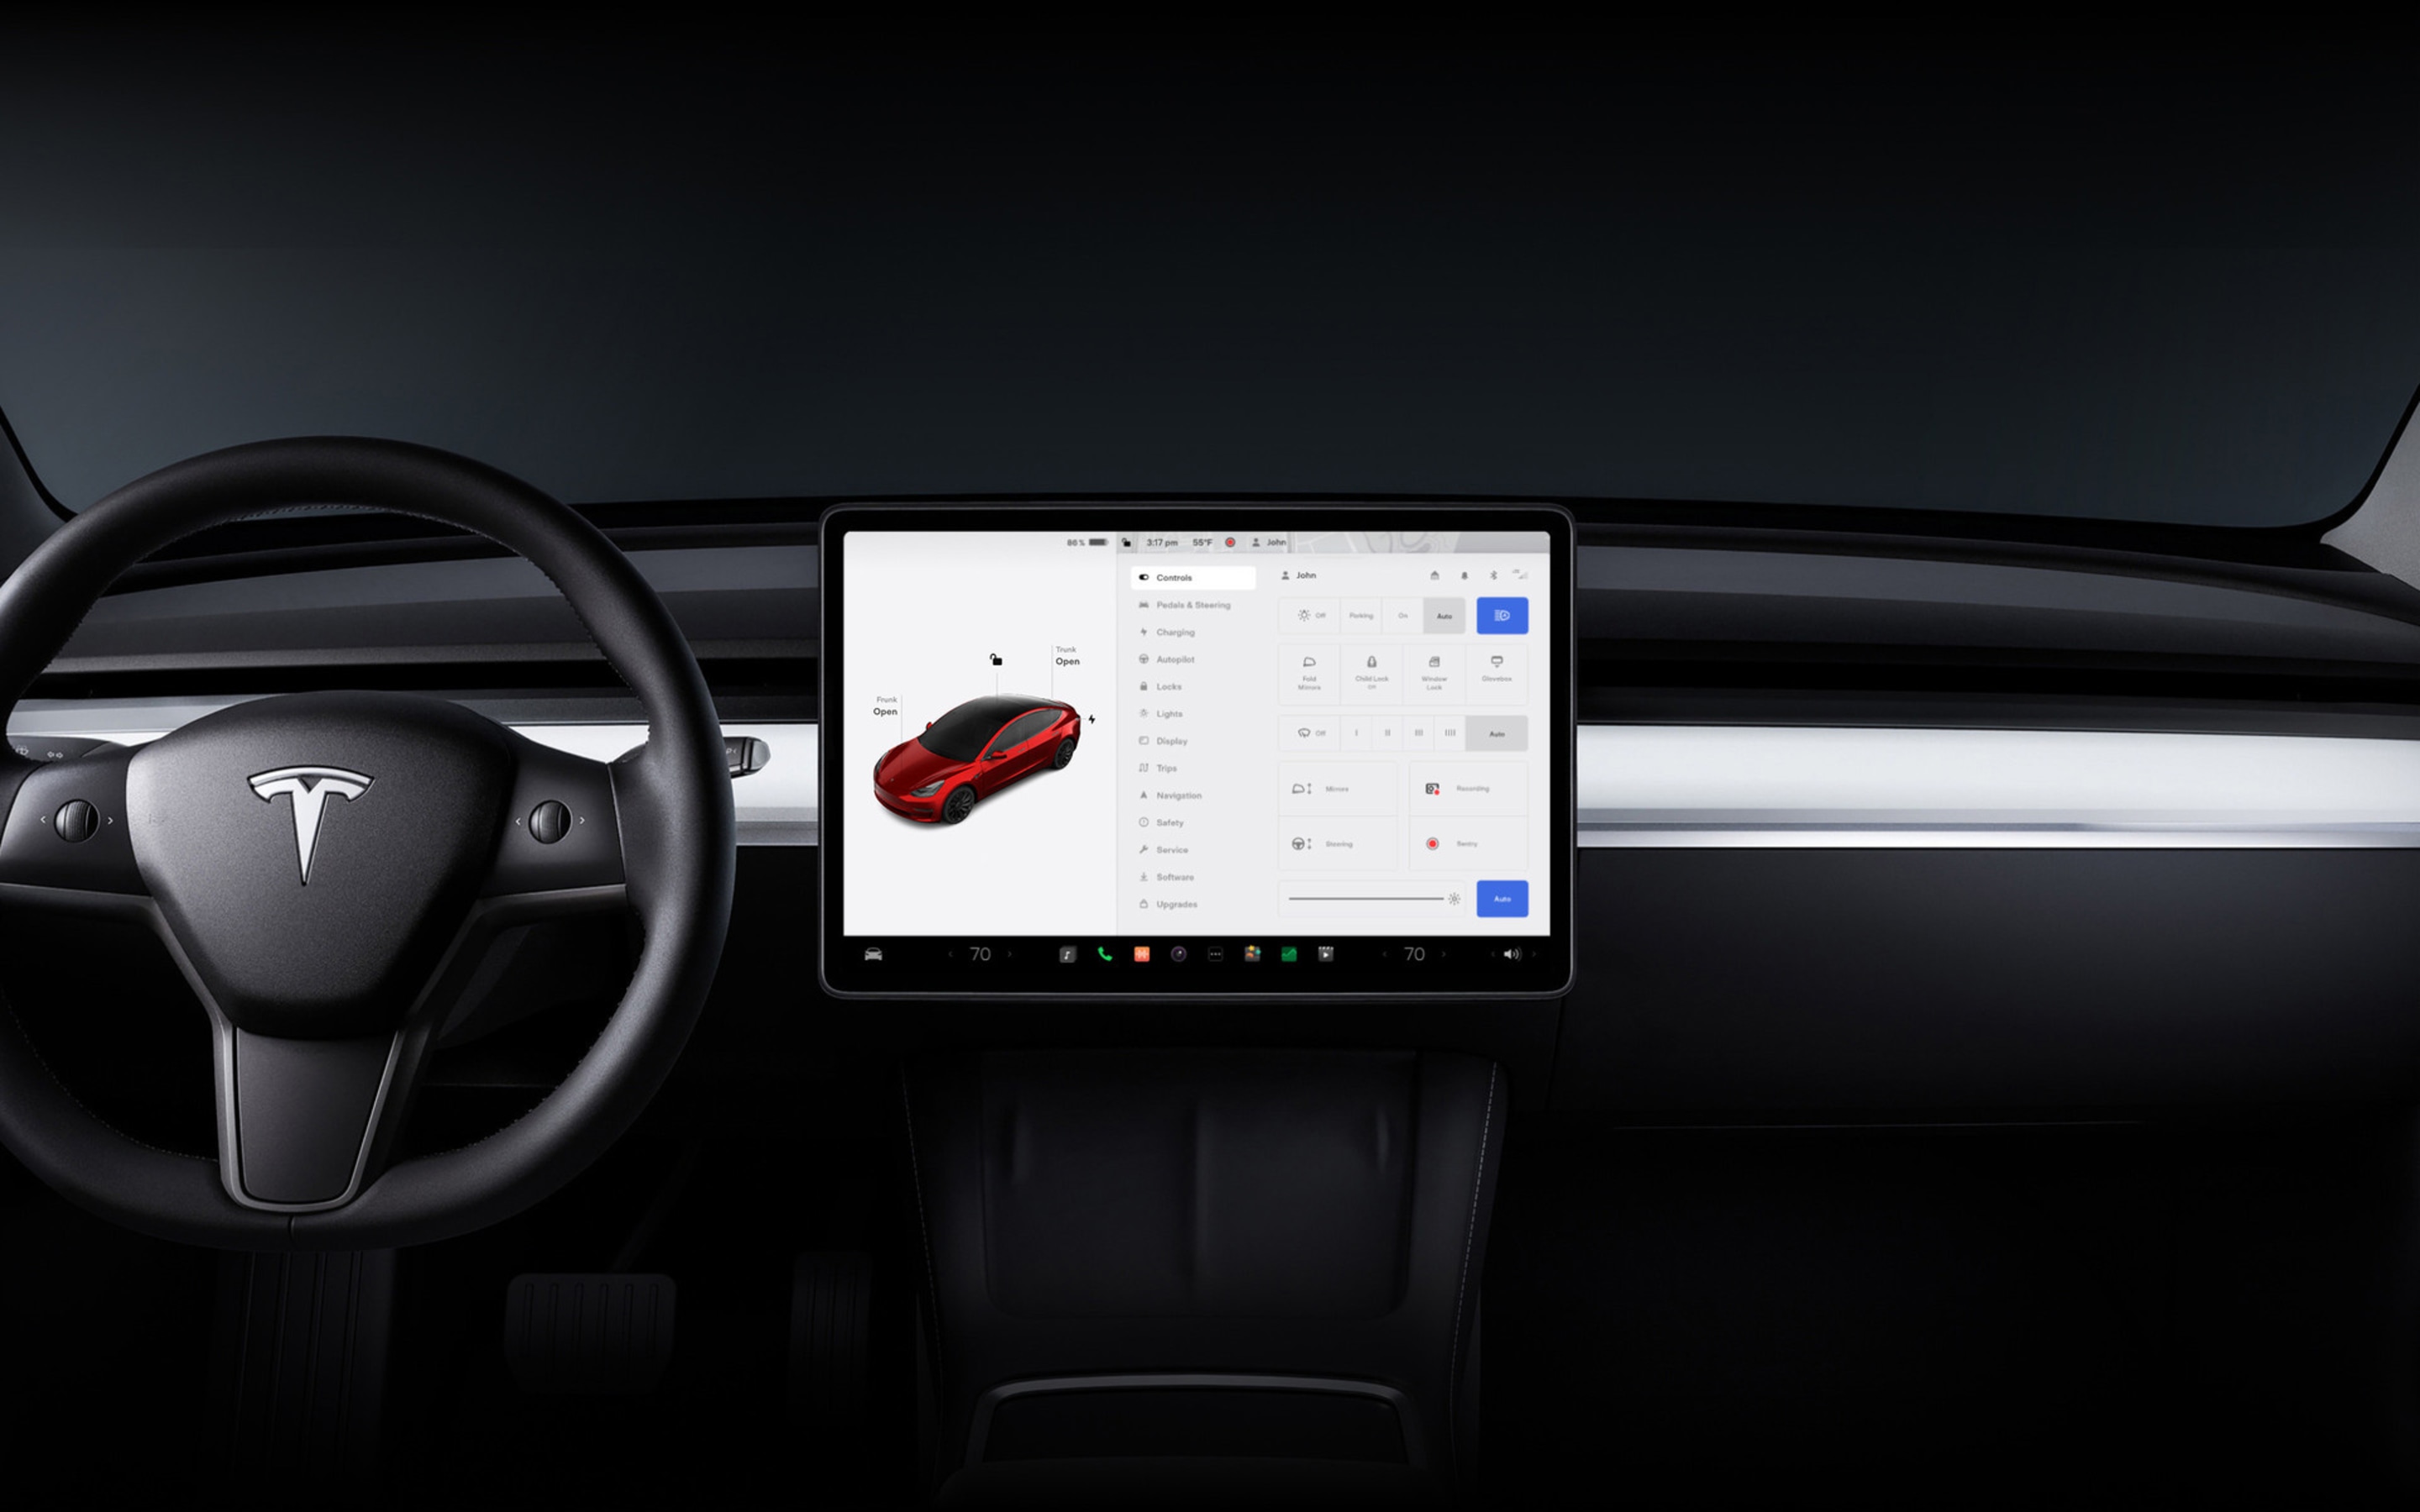 Model 3 15" touchscreen with vehicle controls